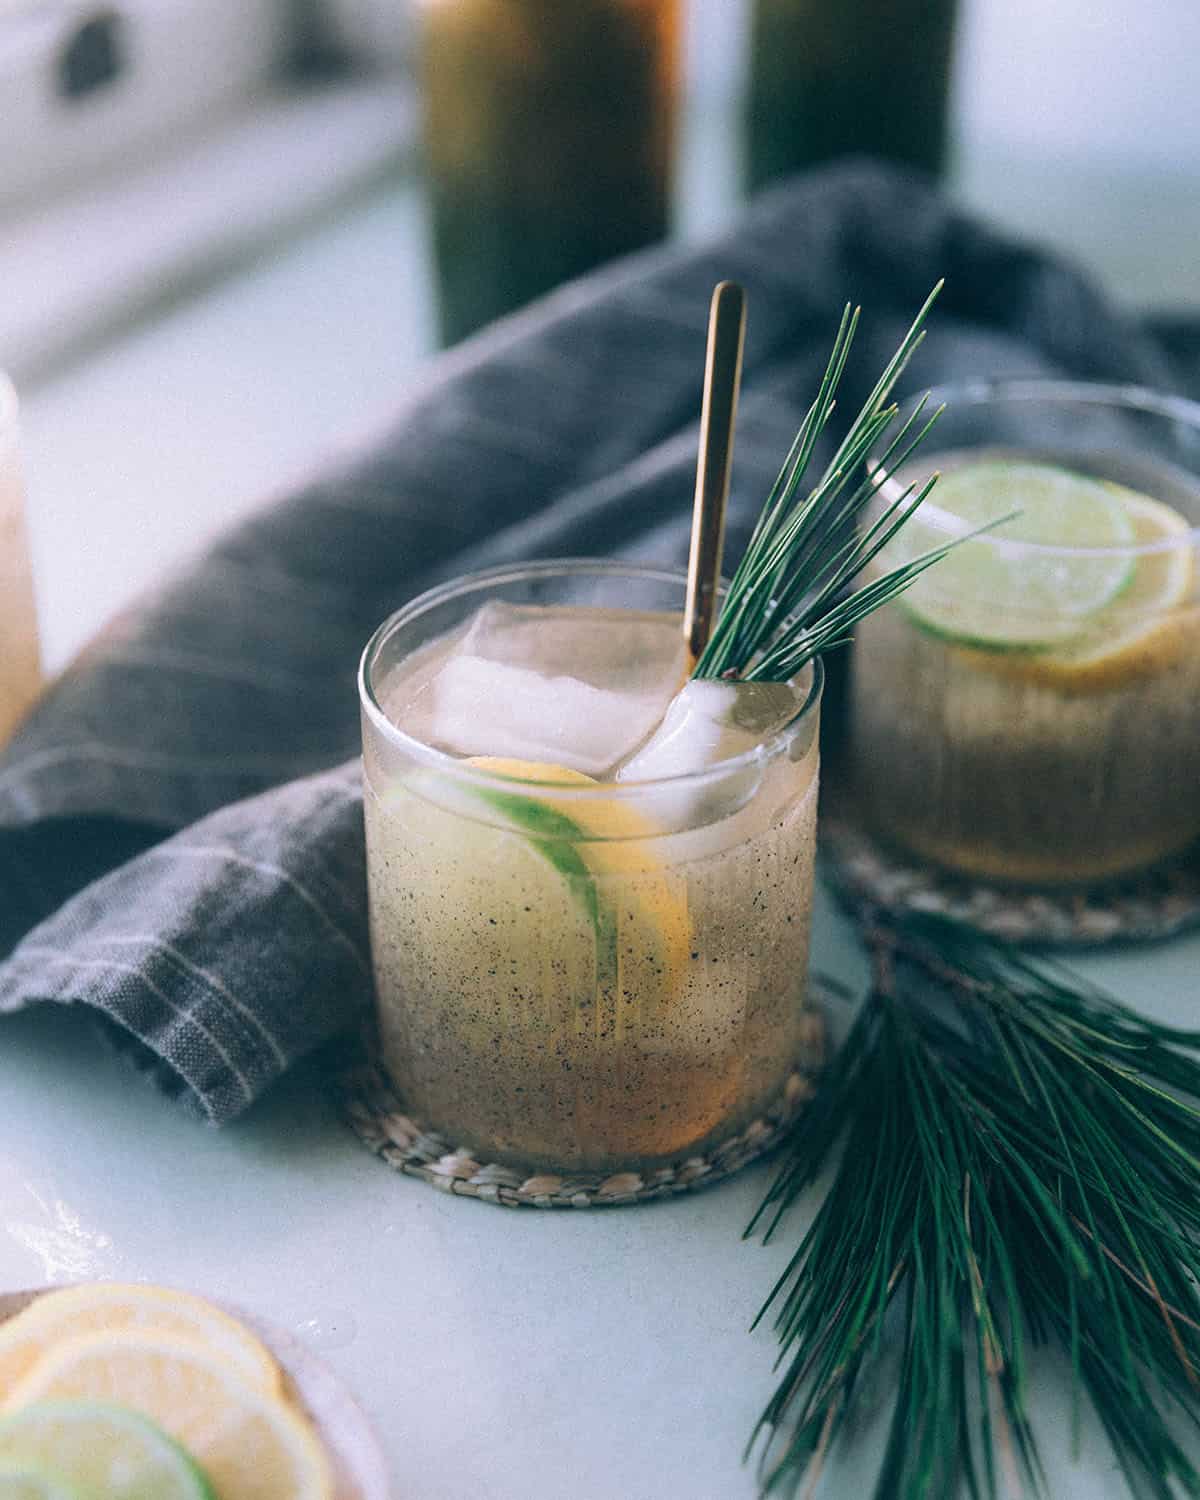 A glass of pine needle soda on ice garnished with lemon and lime slices, fresh pine needles, and a gray towel.